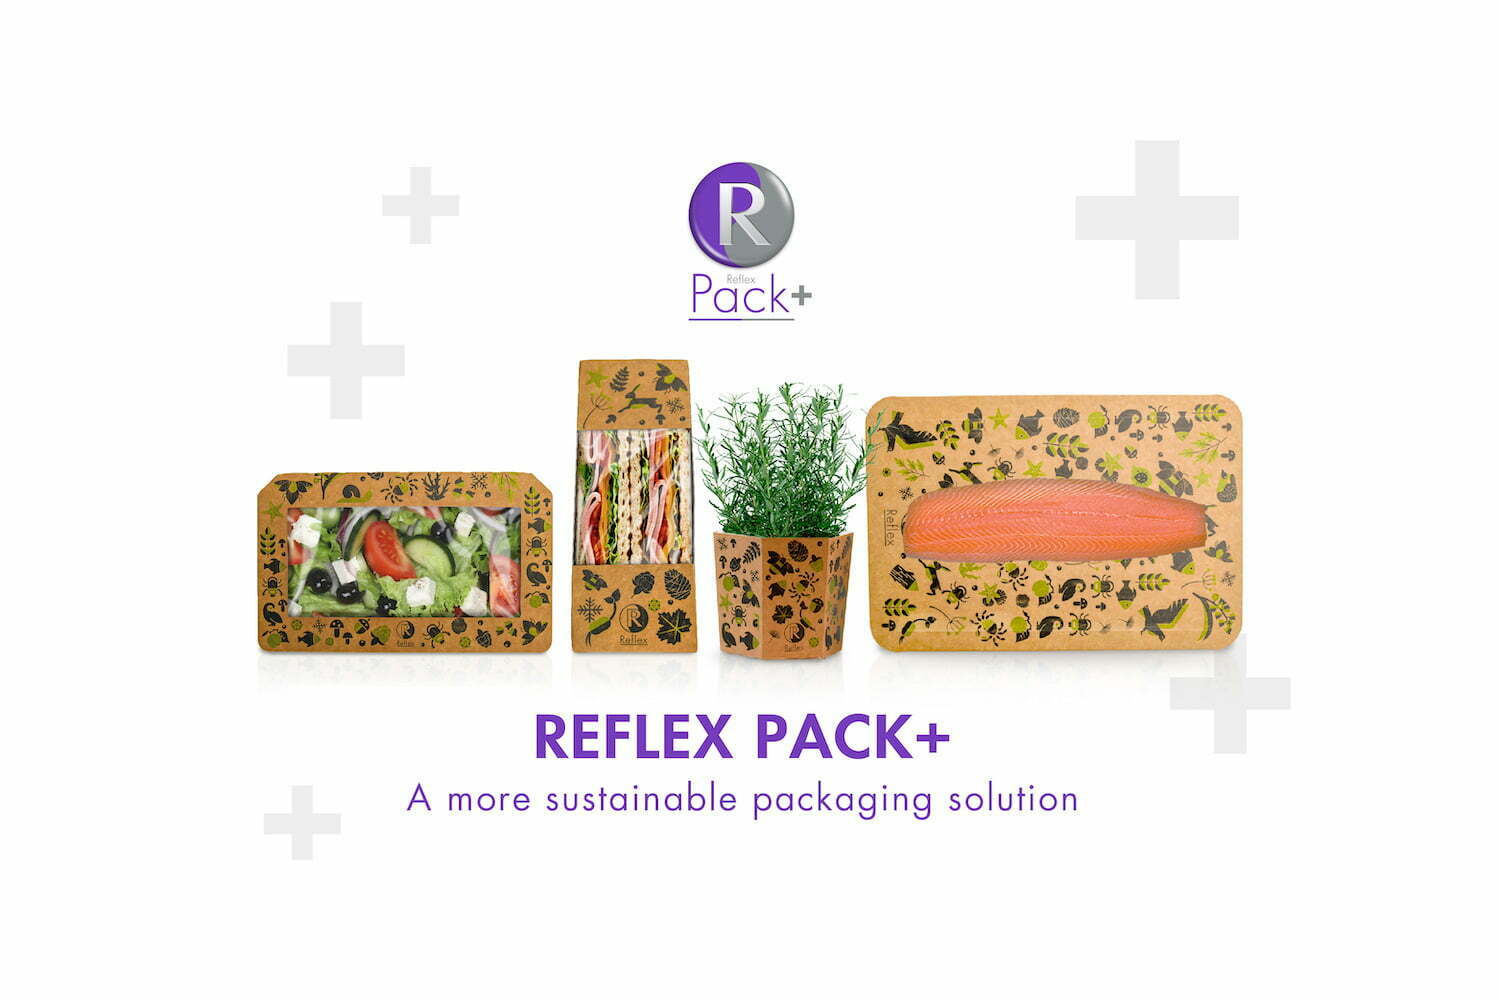 The Launch of Reflex Pack Plus